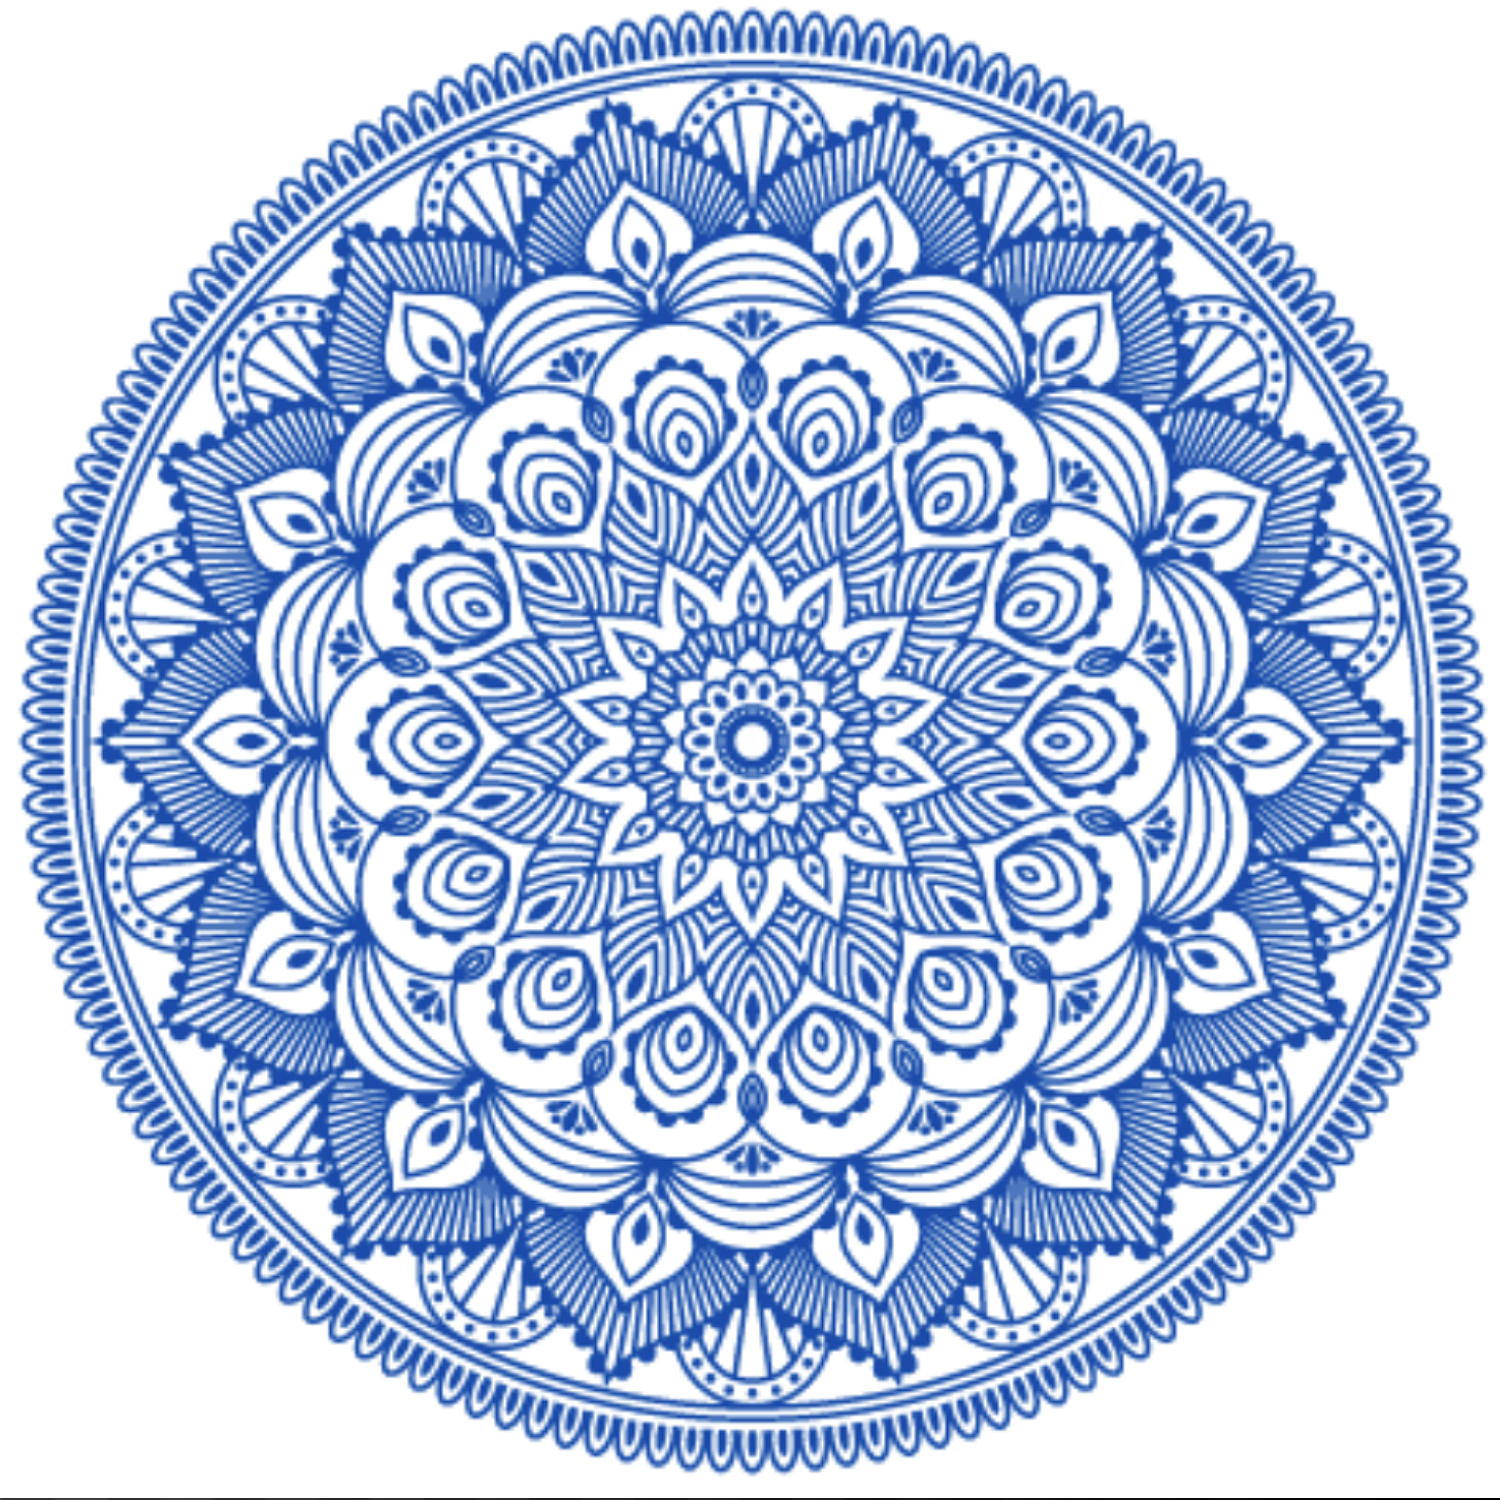 How to create a mandala in Illustrator with MirrorMe and DynamicSketch